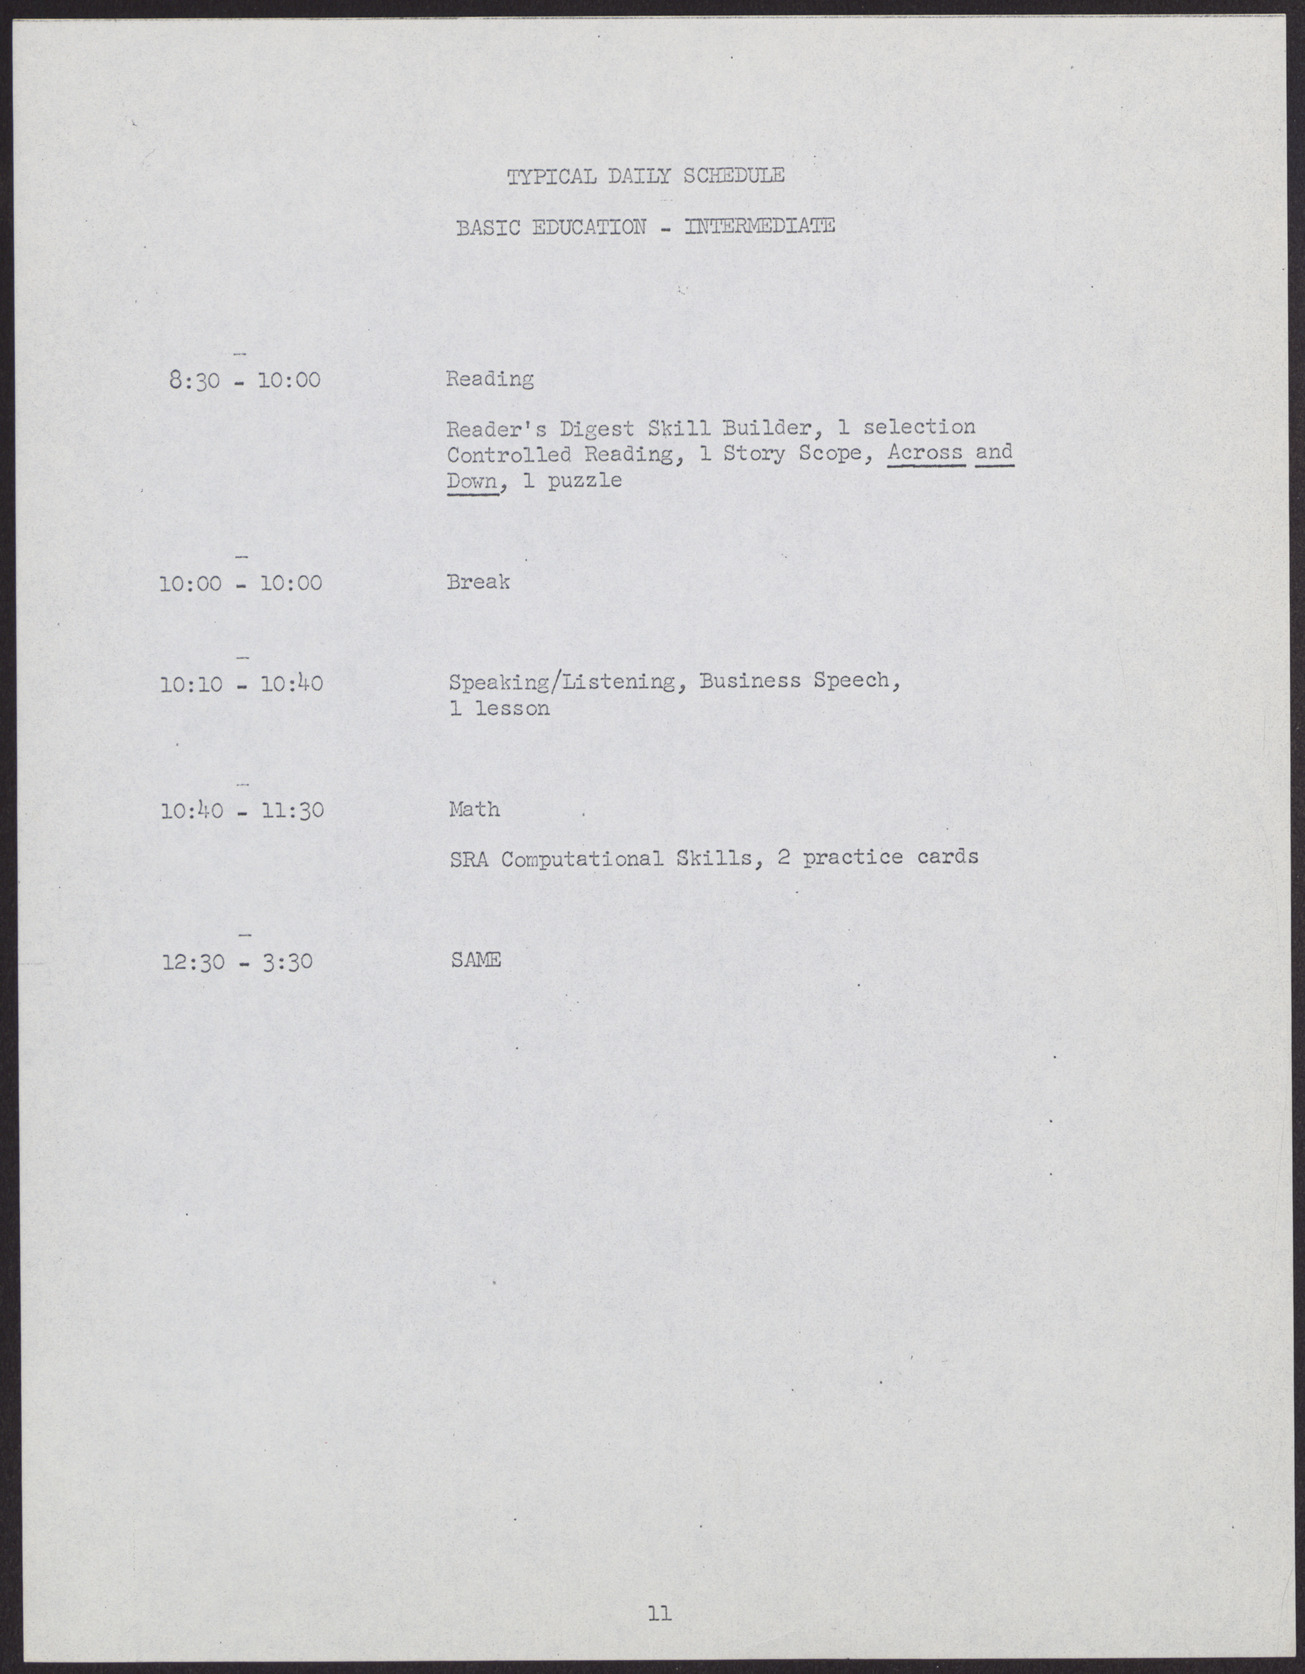 Proposal to the Clark County, Nevada Concentrated Employment Program (21 pages, missing some pages/sections listed in its table of contents), July 2, 1968, page 15